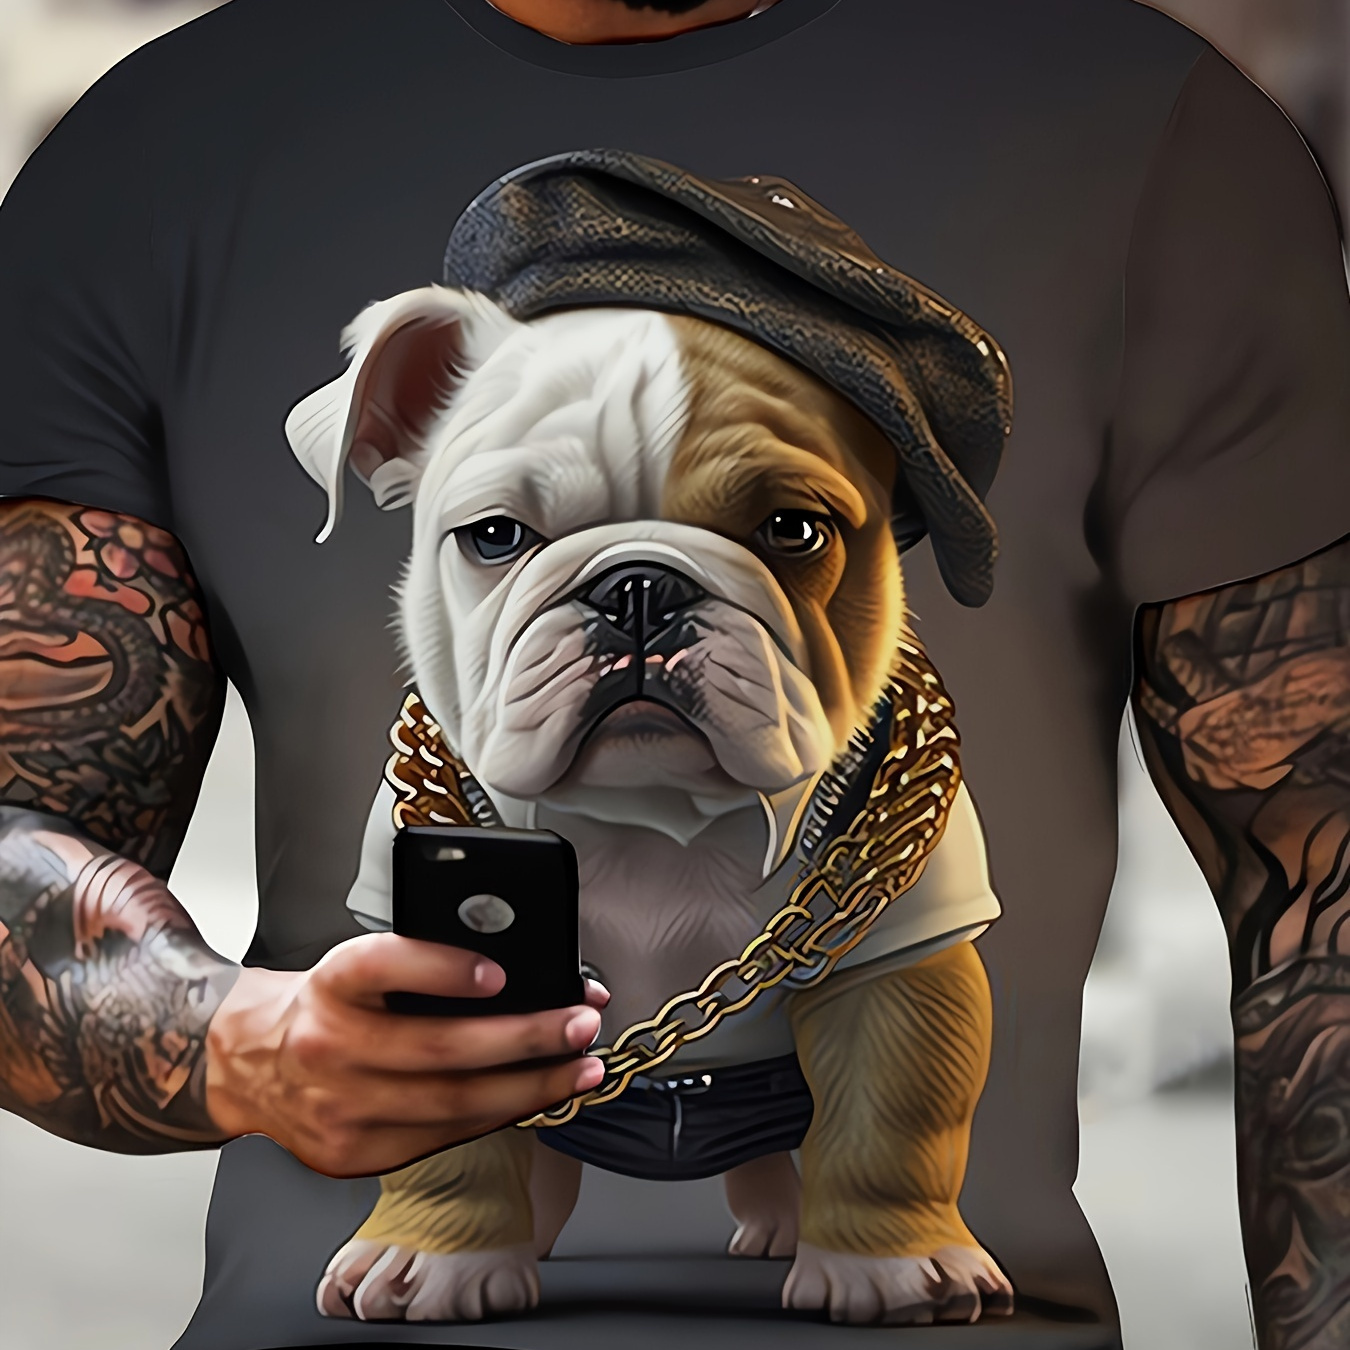 

3d Digital Bulldog Wearing Necklace And Hat Pattern Crew Neck And Short Sleeve T-shirt, Novel And Chic Tops For Men's Summer Street Wear